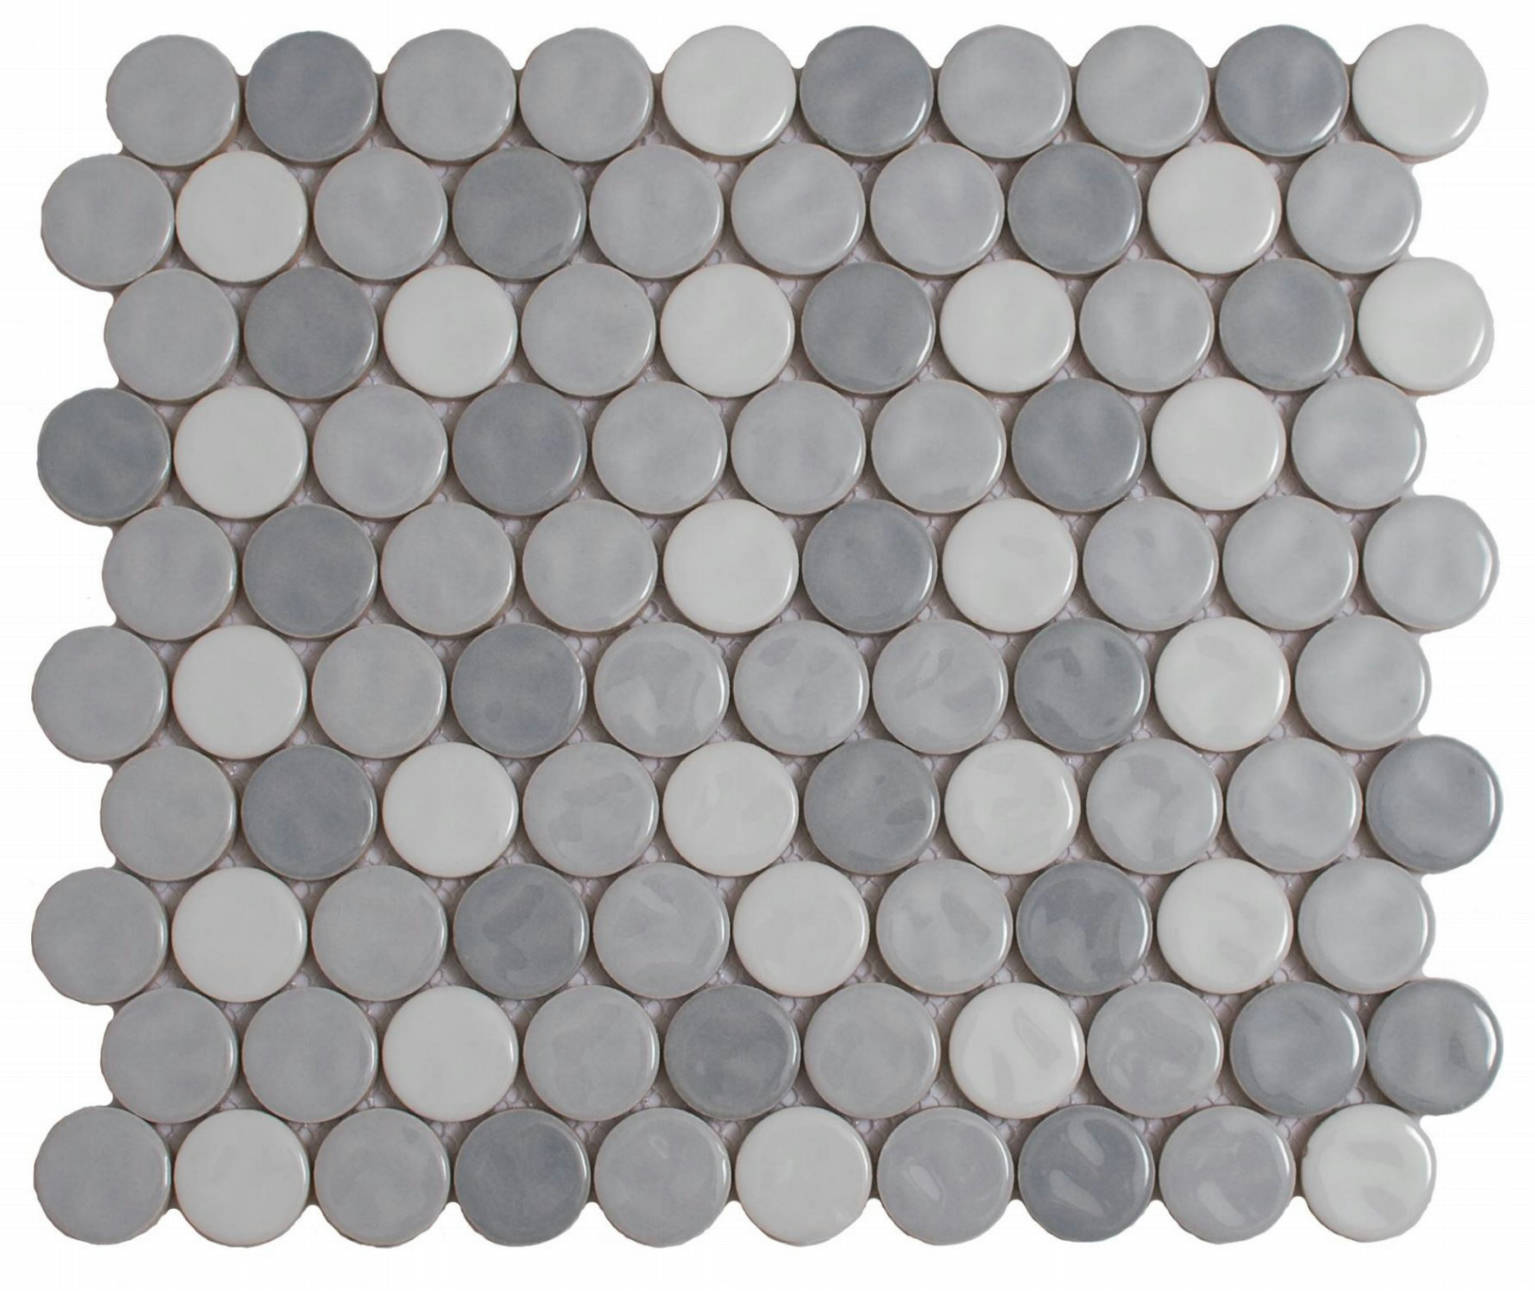 QS14-101112 | Stones & More | Finest selection of Mosaics, Glass, Tile and Stone